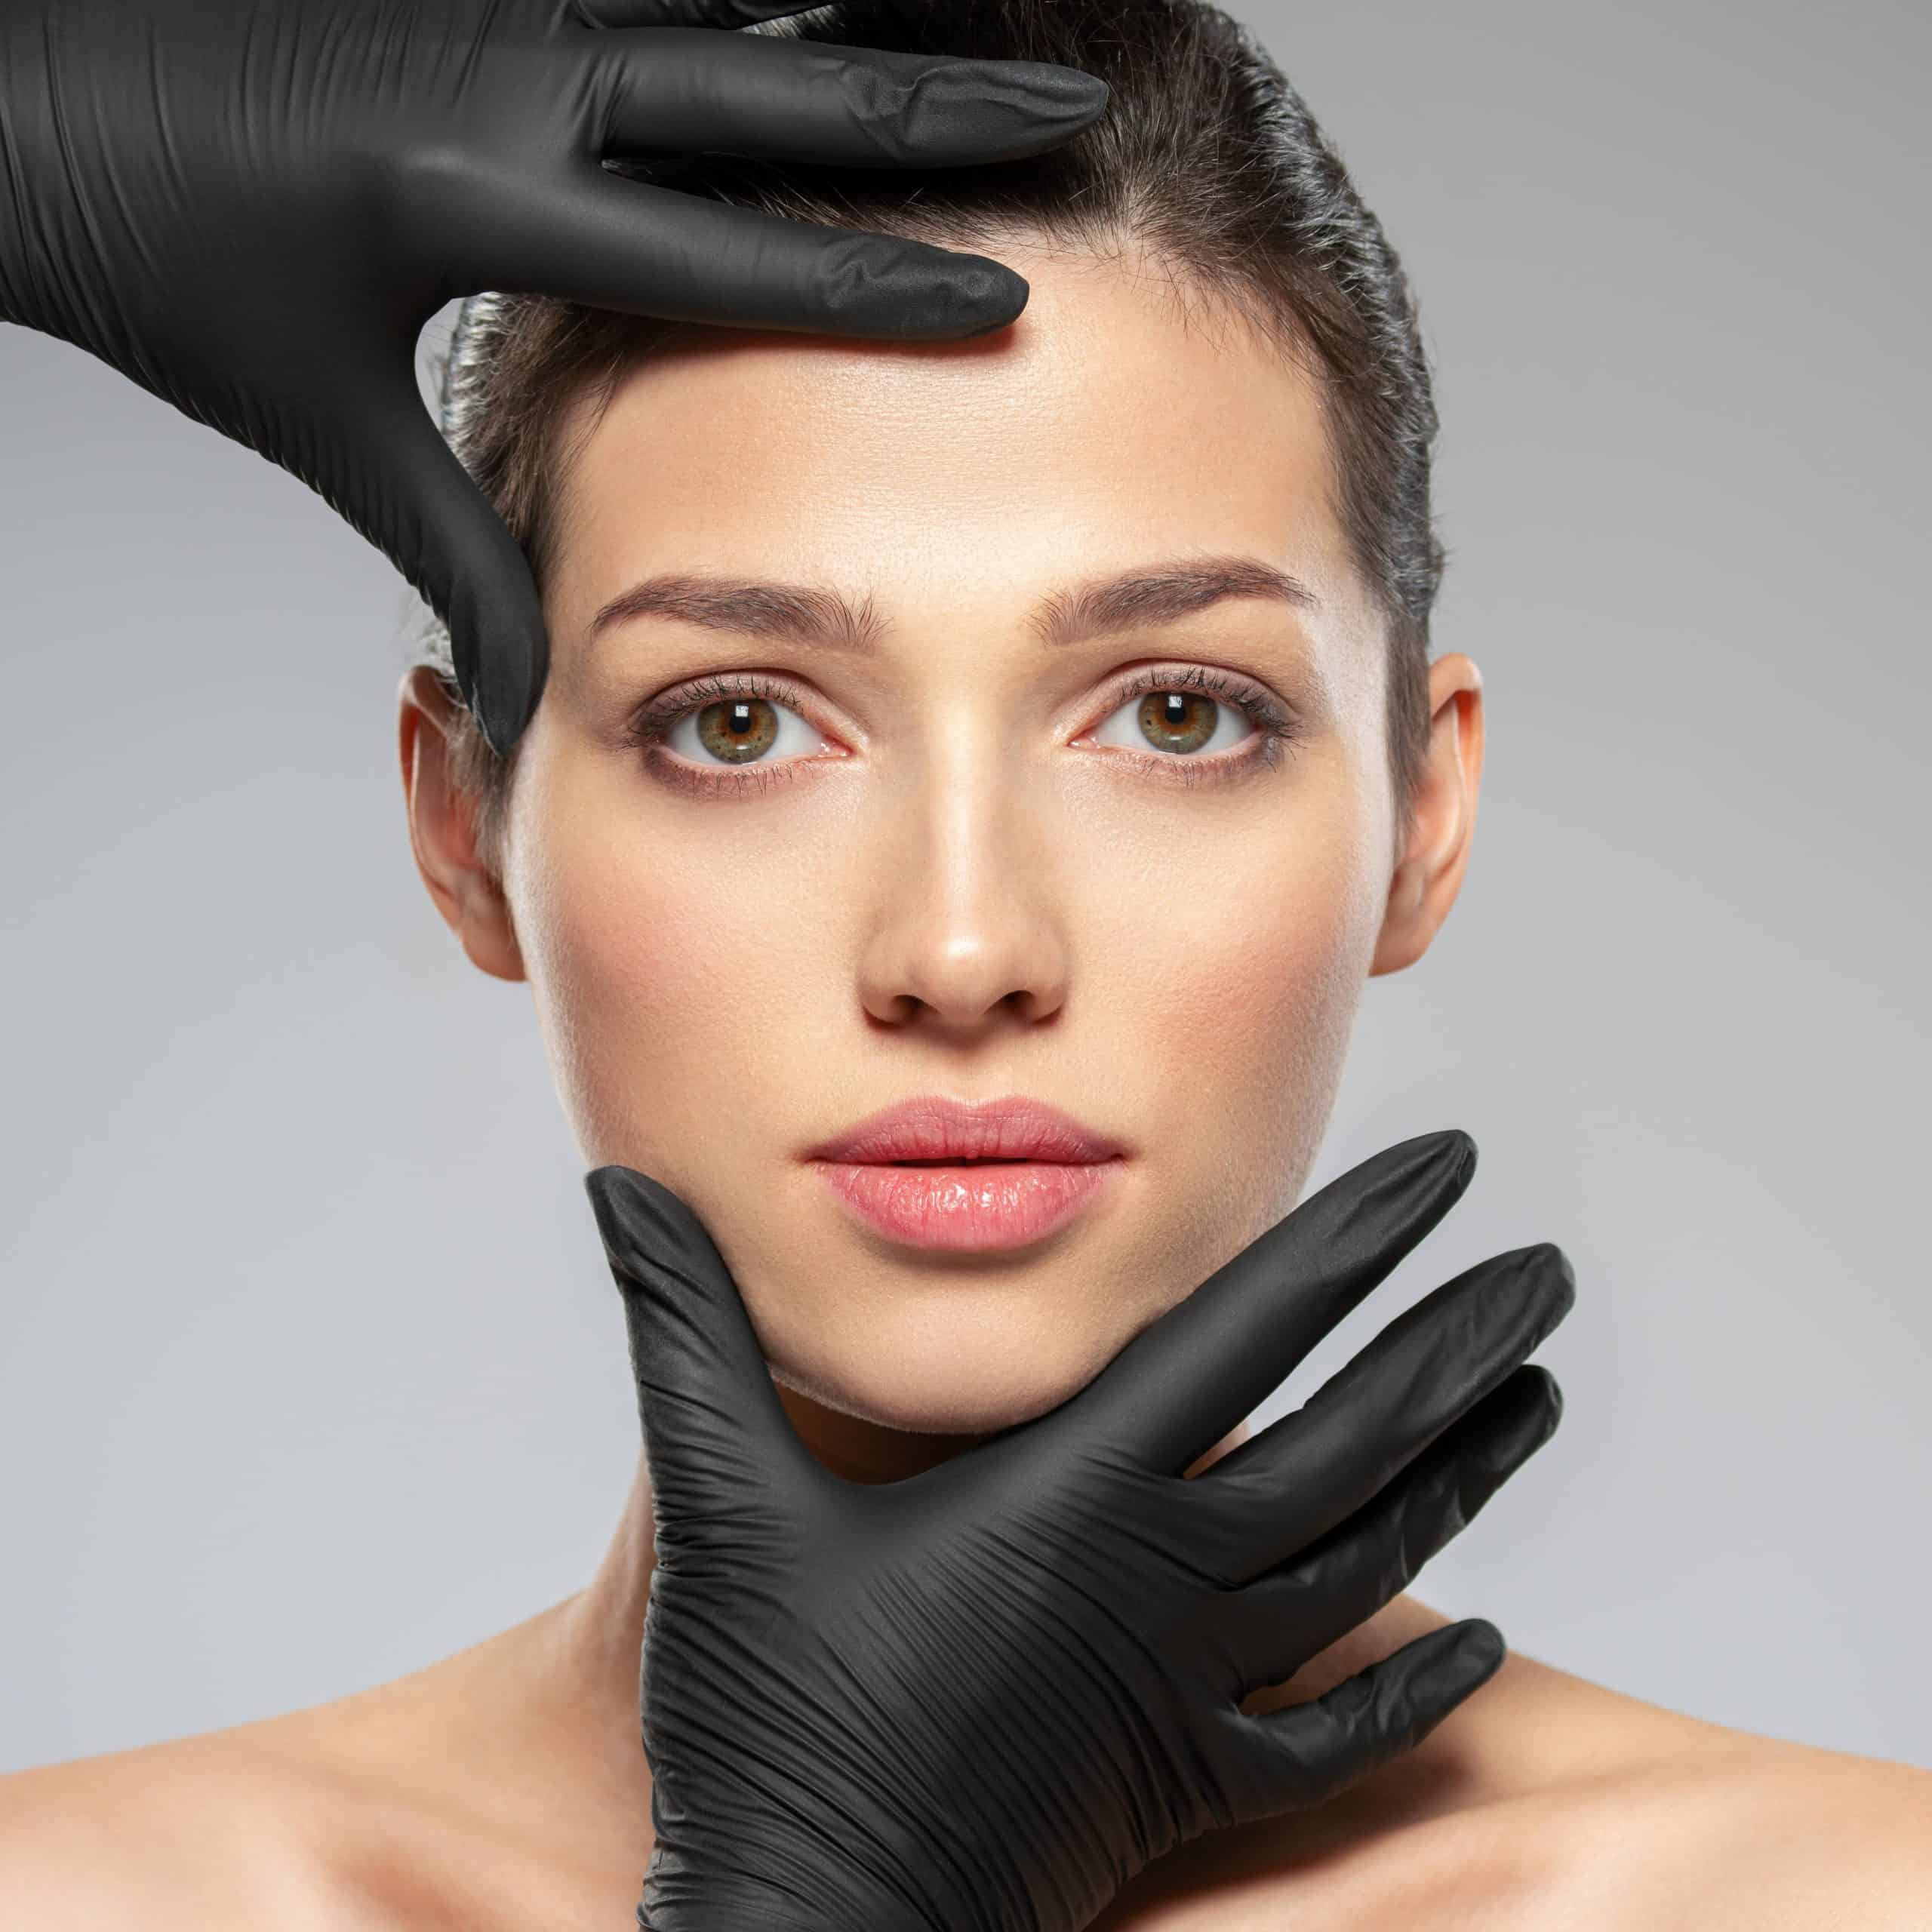 Top 10 tips for plastic surgery success